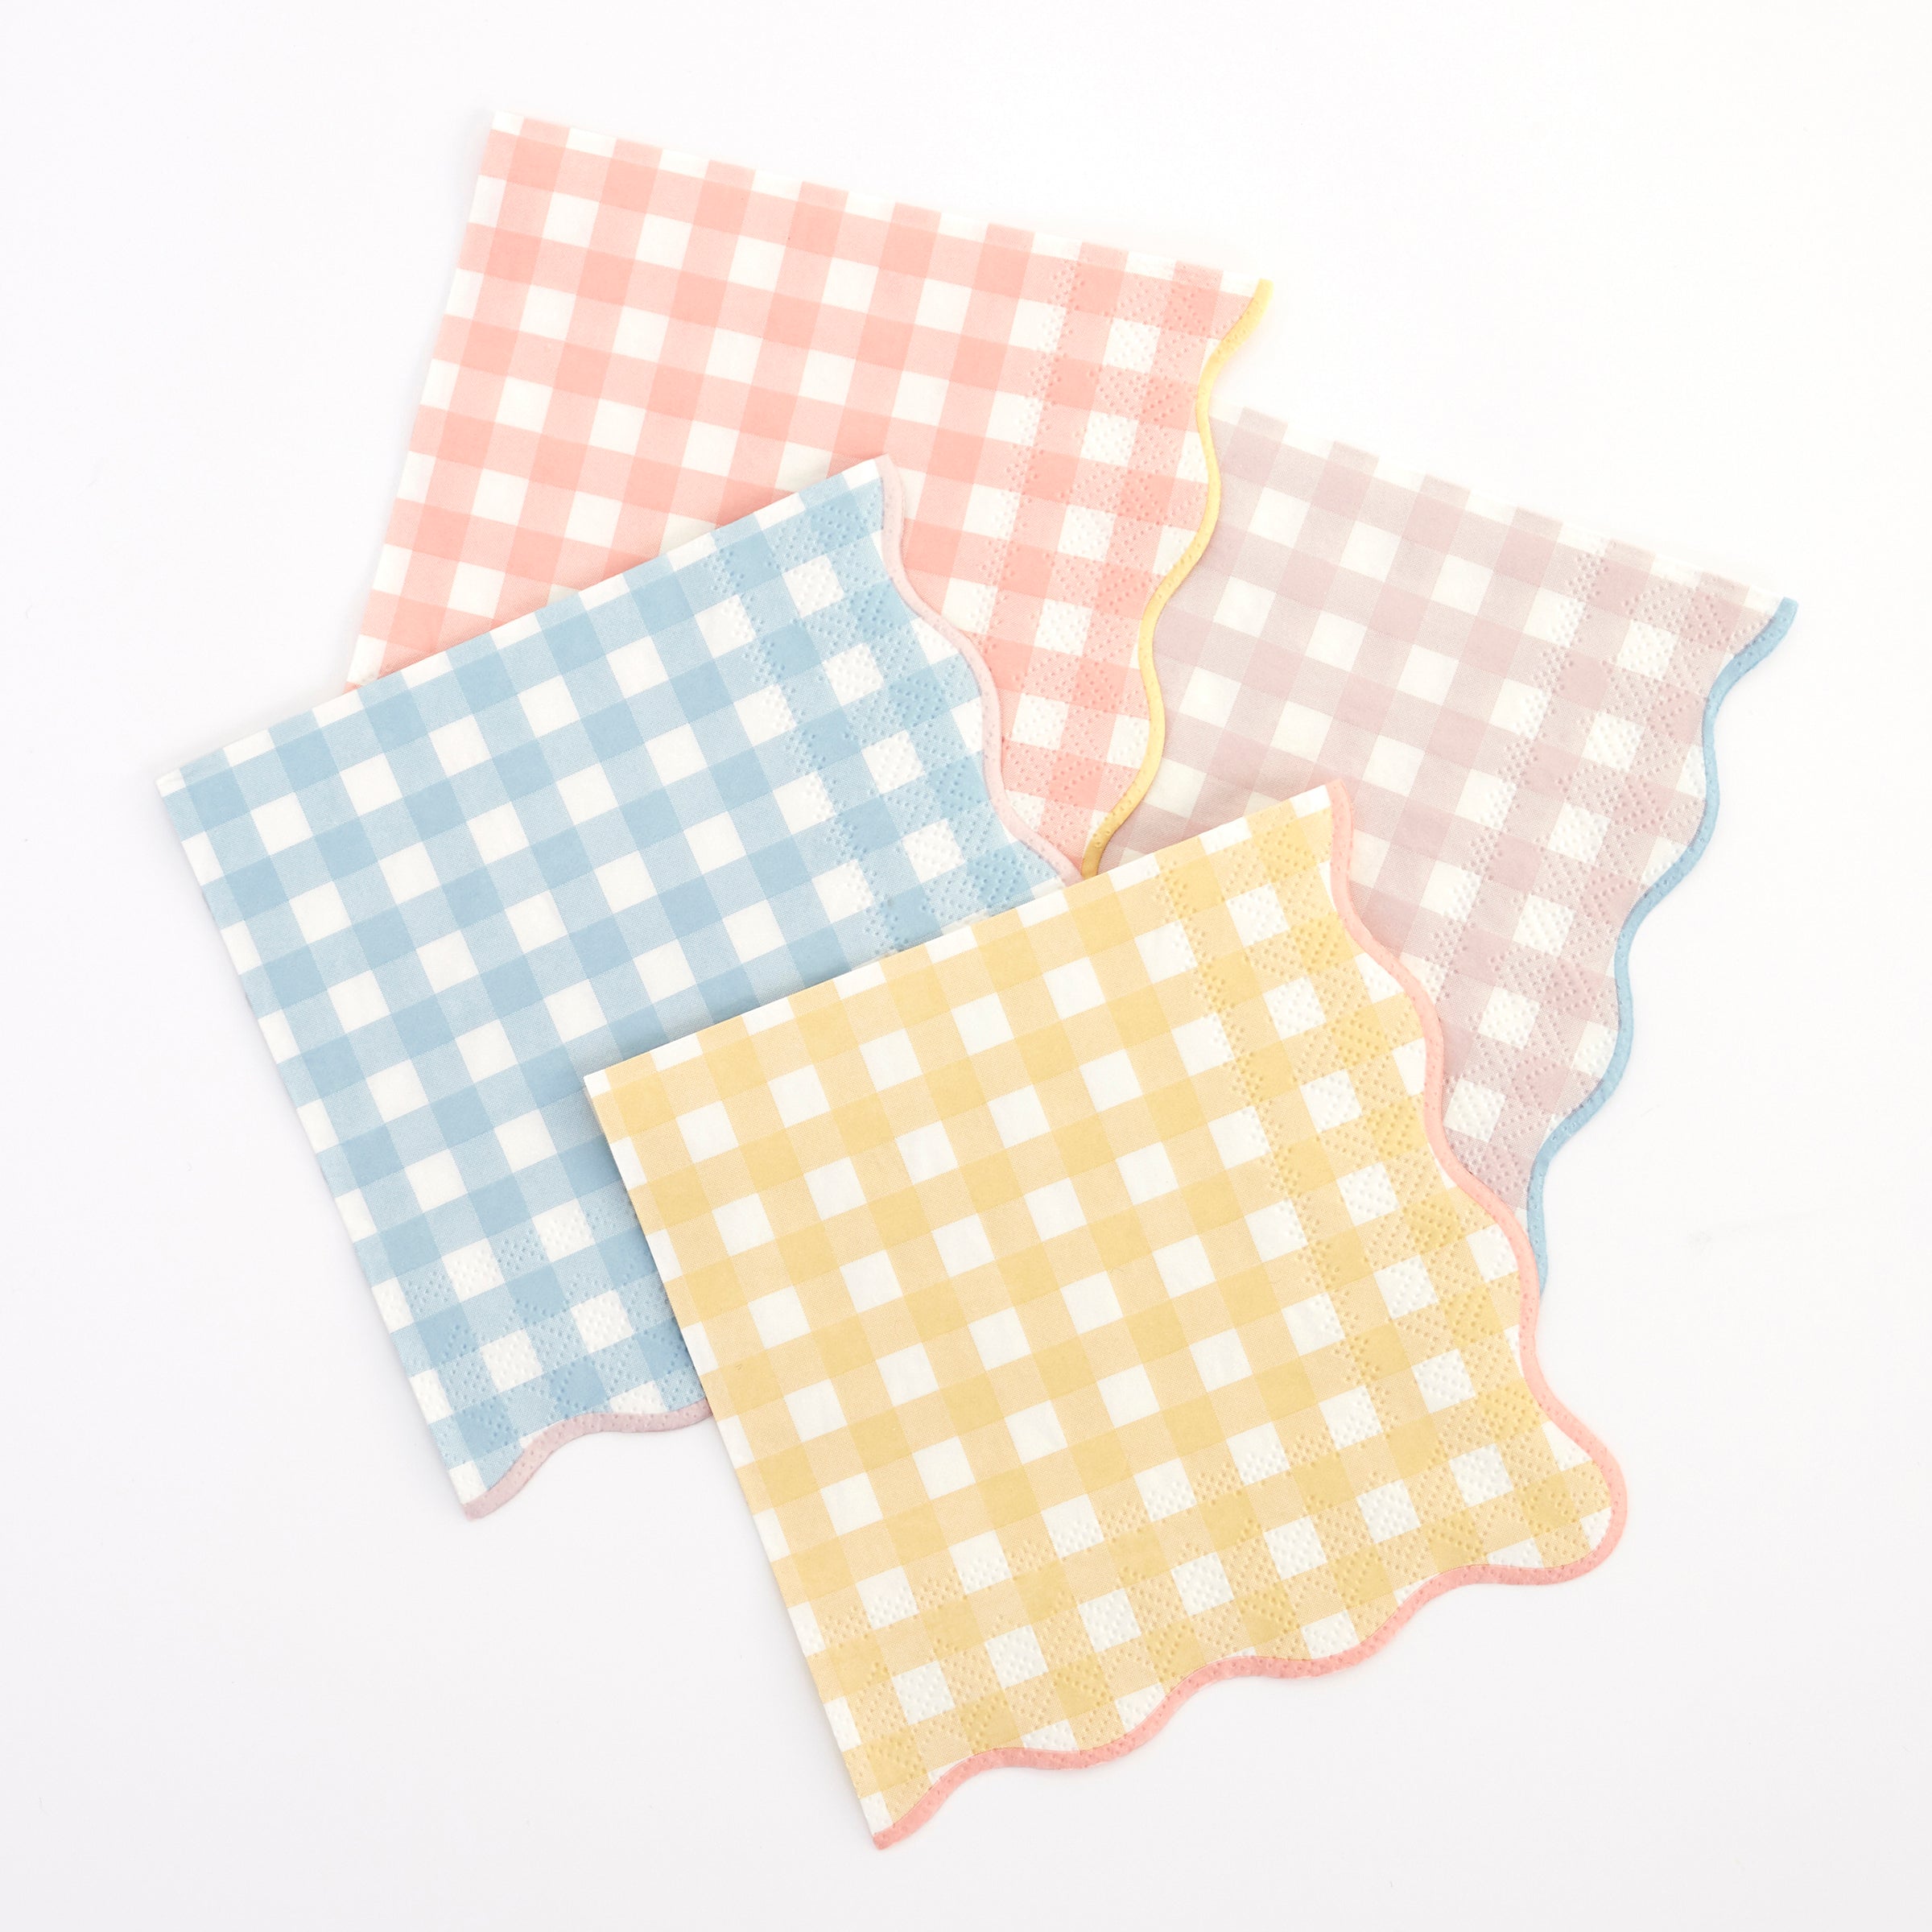 Our disposable napkins with a gingham print and scalloped edge will look amazing on your party table.